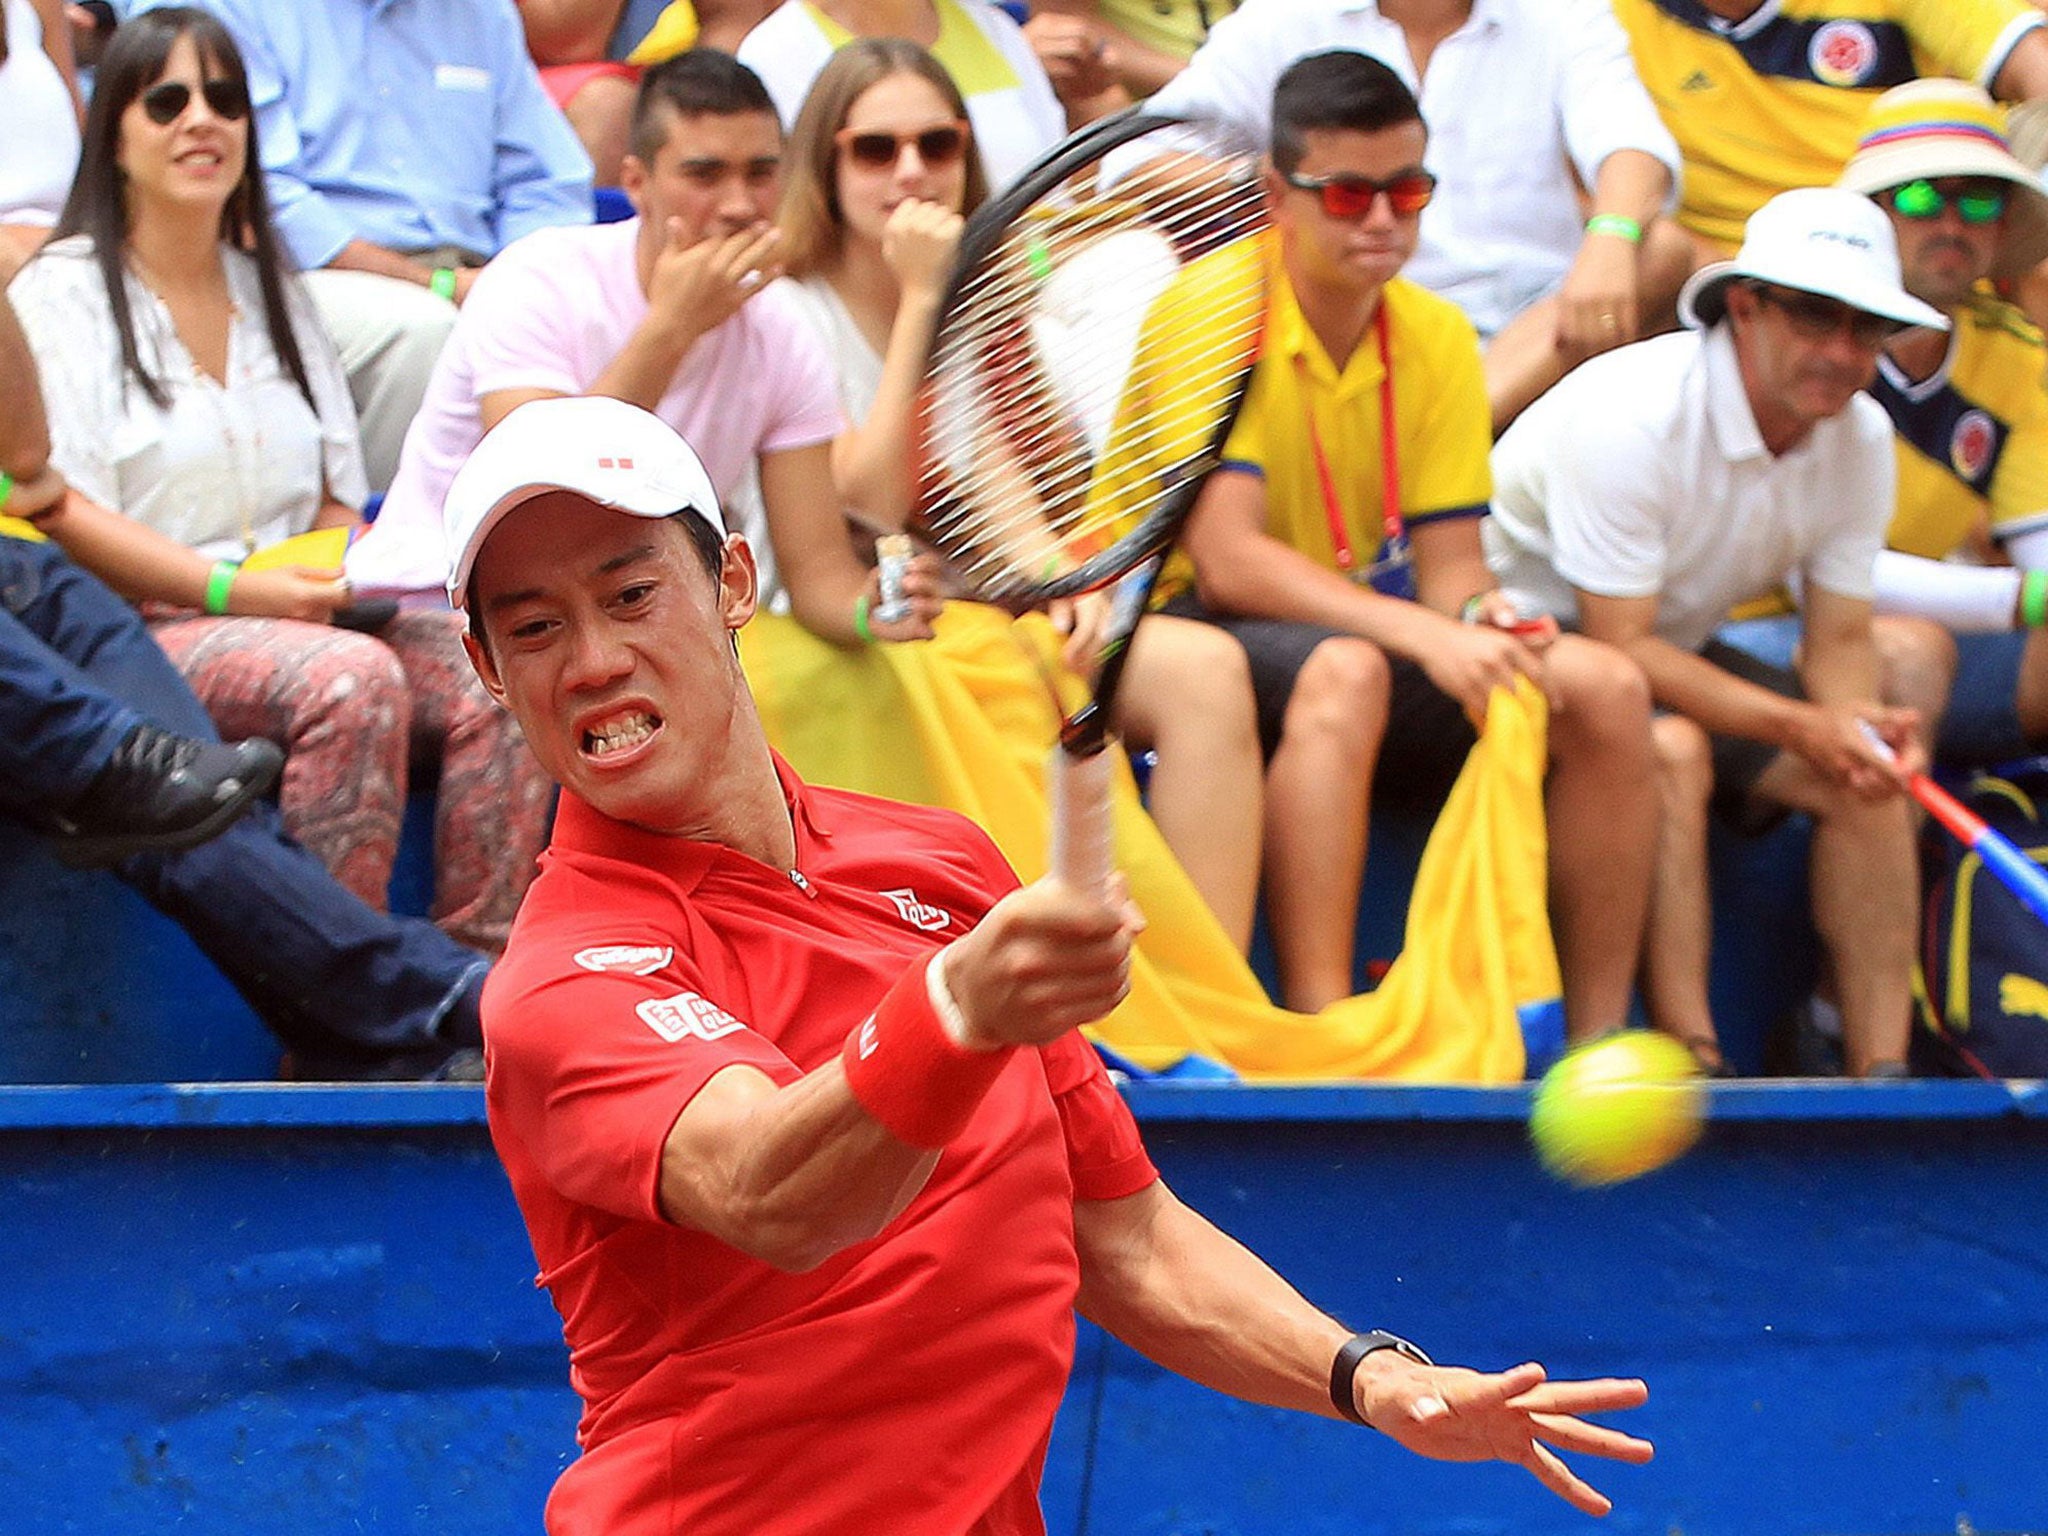 Kei Nishikori is the only Japanese man in the world’s top 100